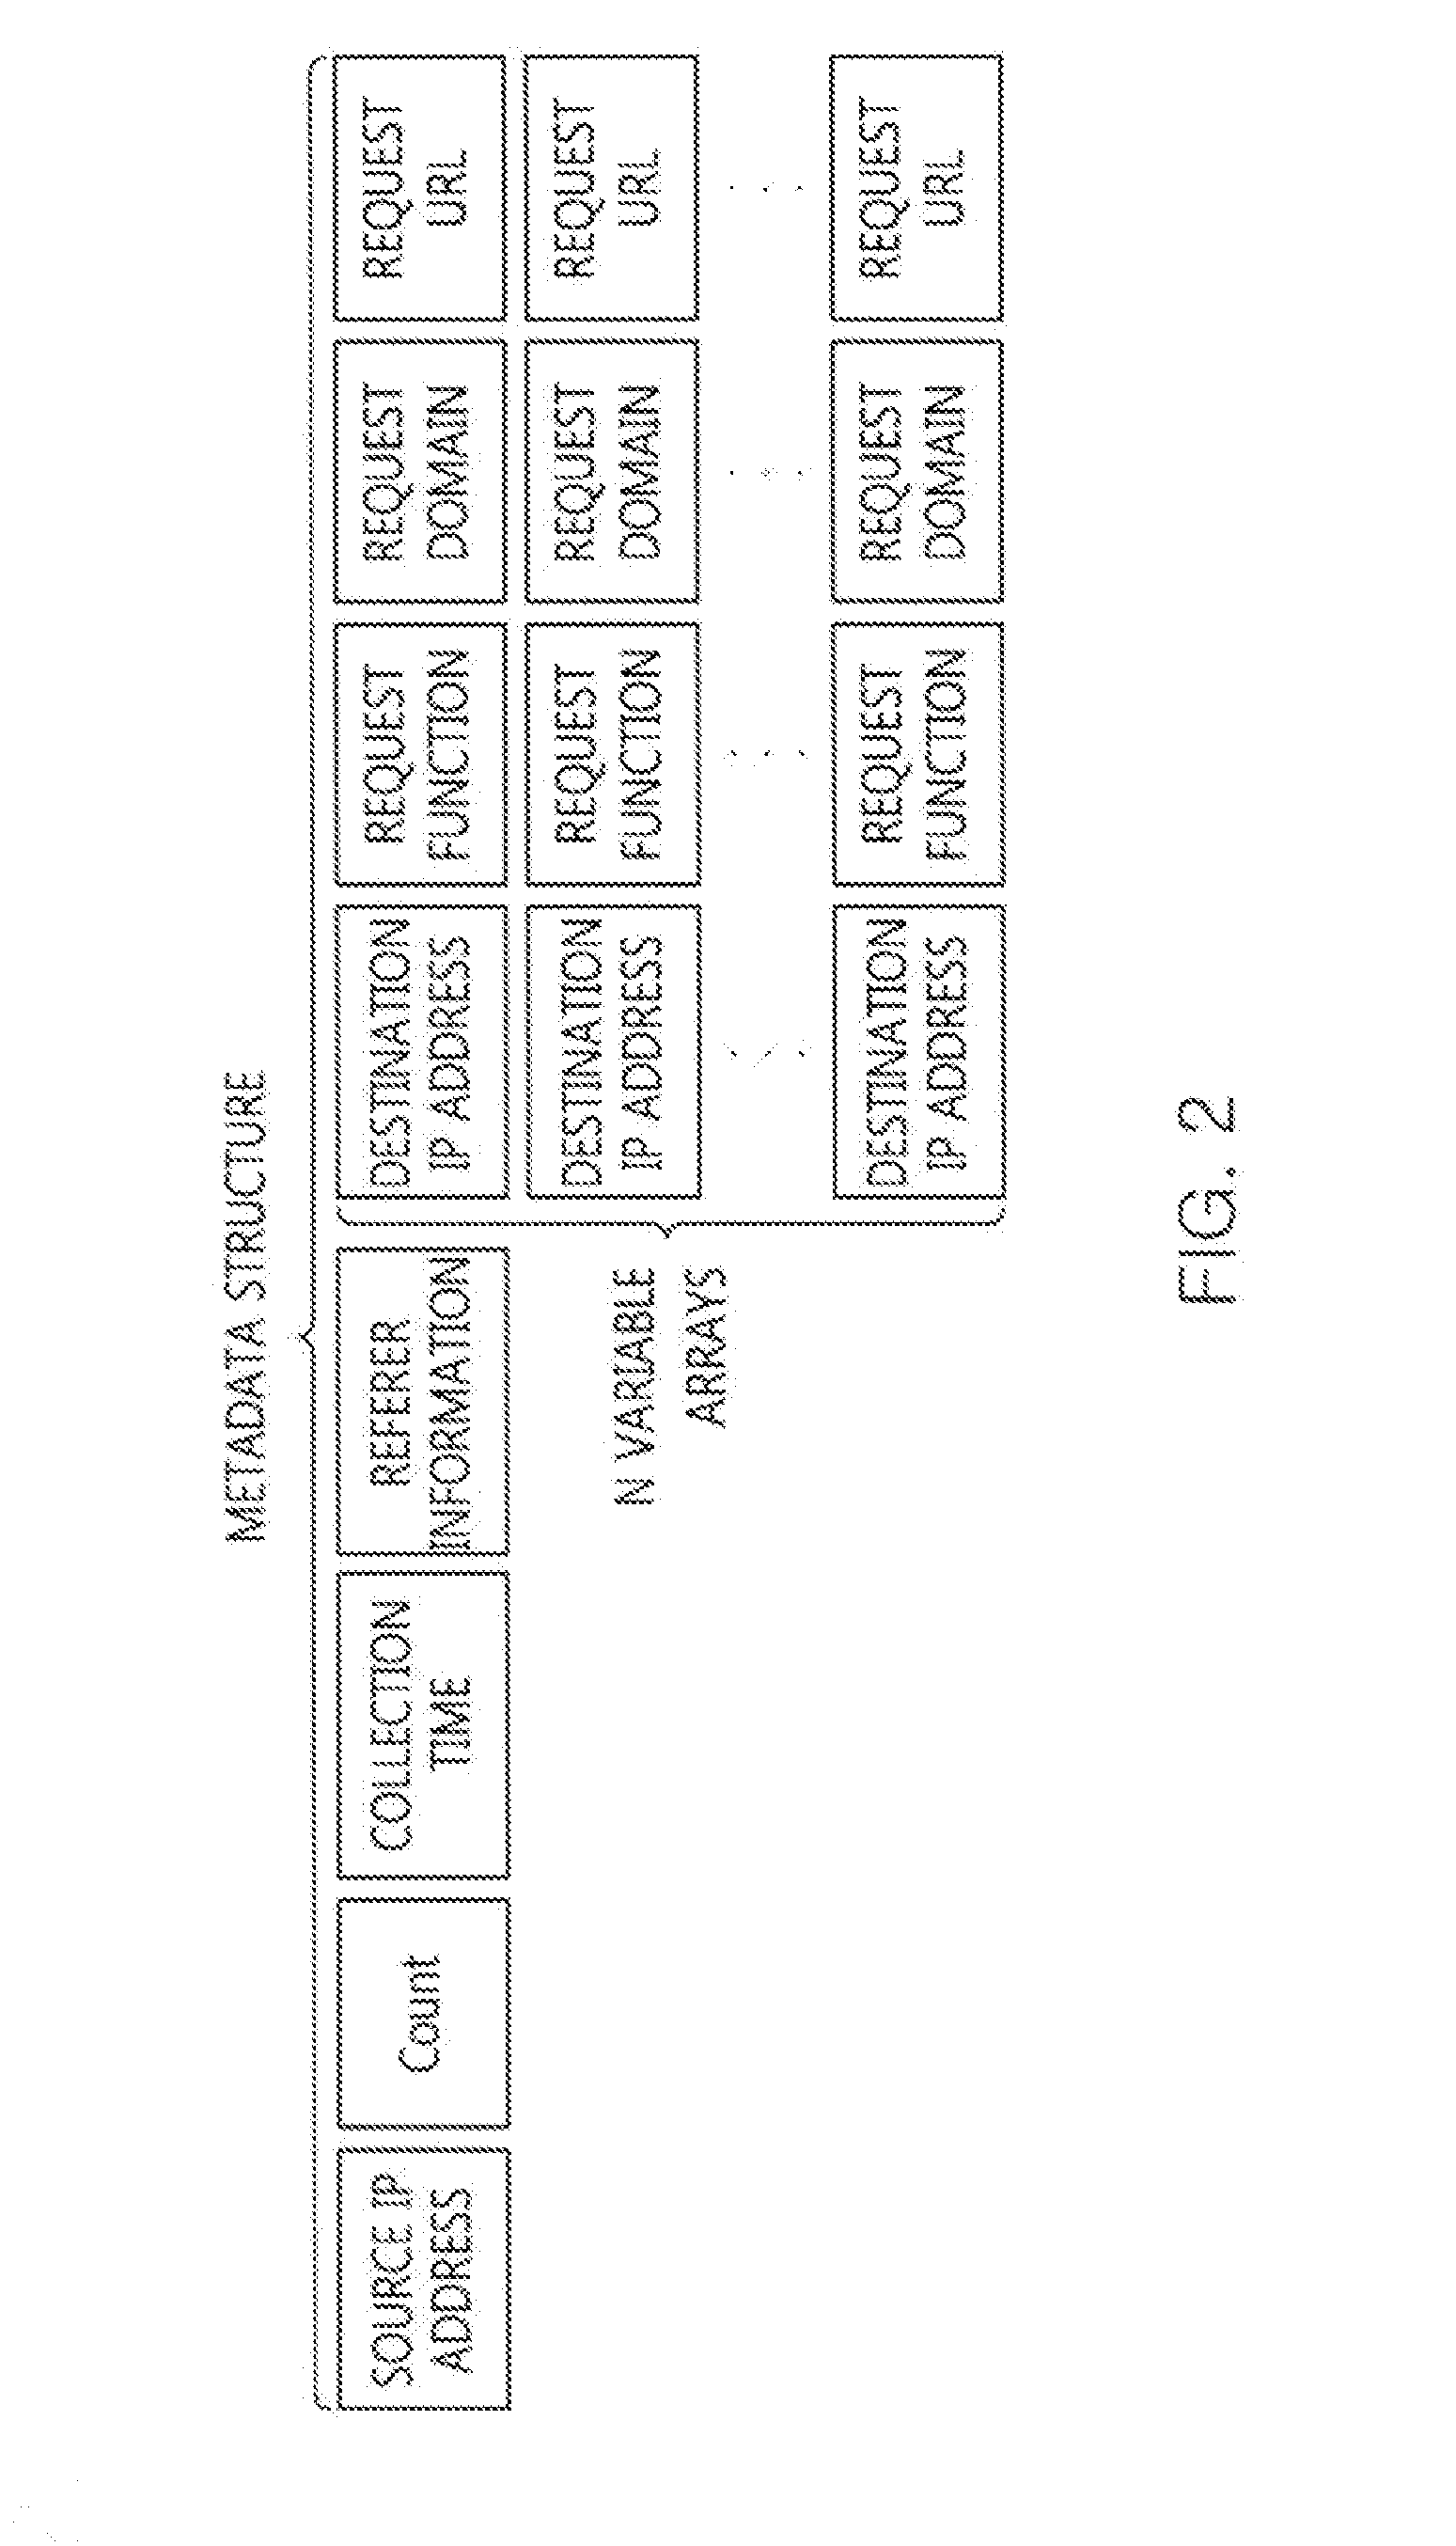 Apparatus and method for detecting HTTP botnet based on densities of web transactions